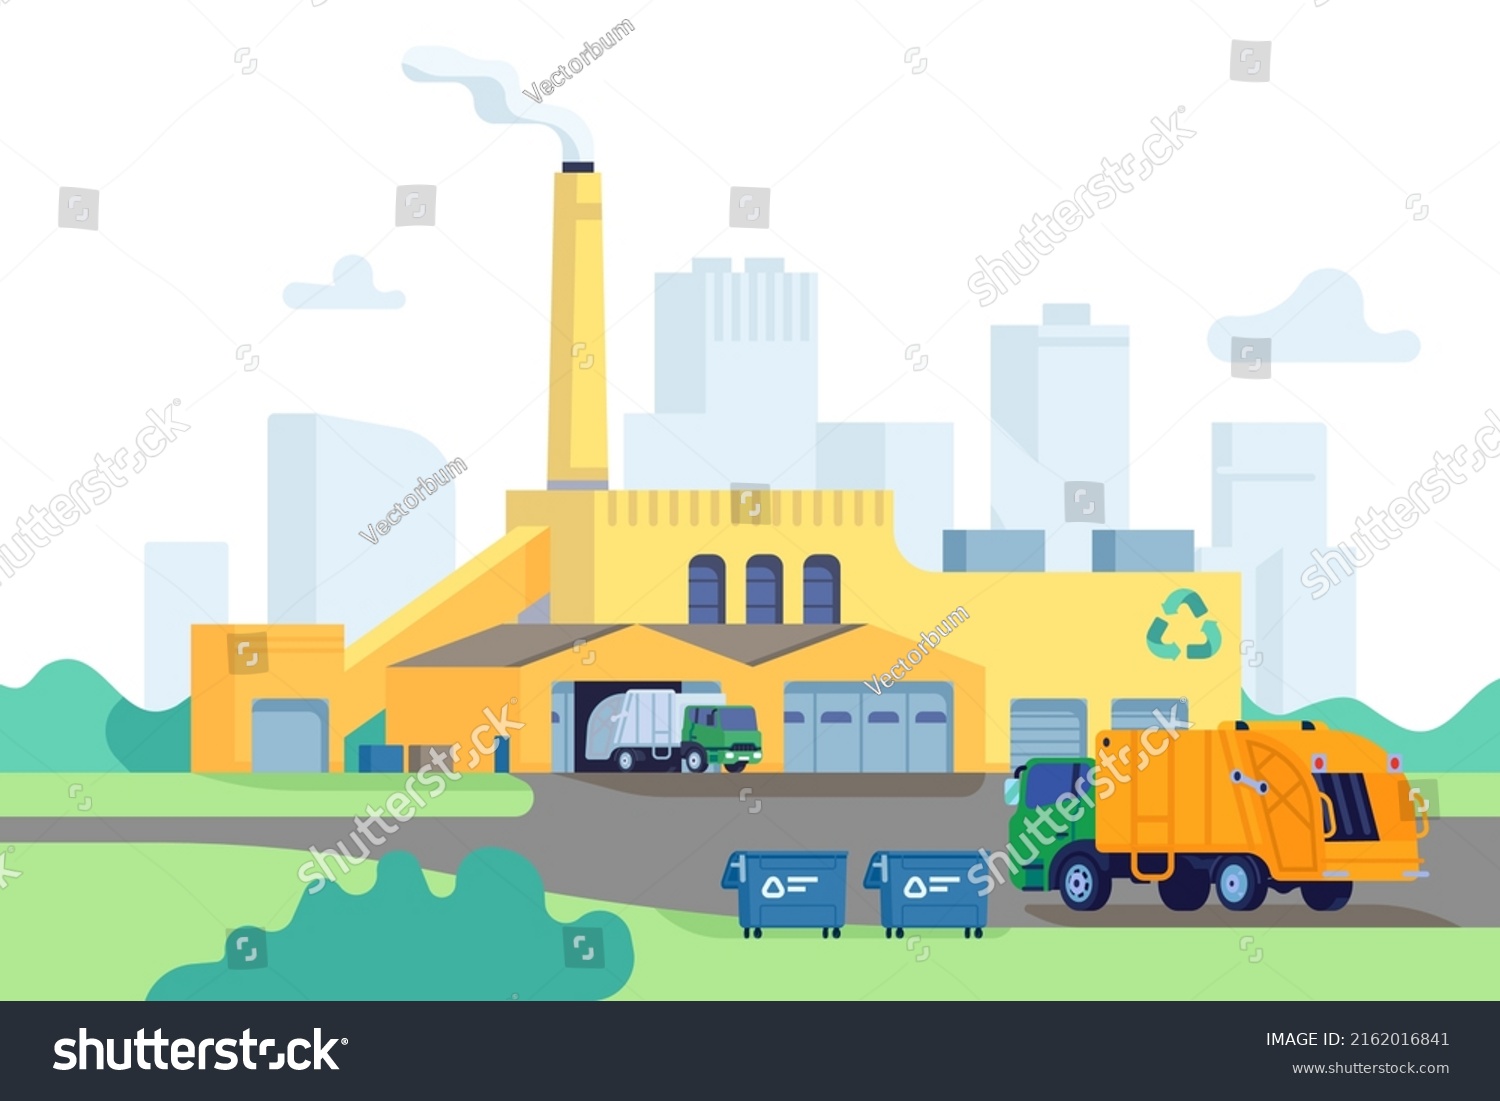 SVG of Waste factory building. Incineration and recycling of garbage process. Trash transportation and shipment. Environmental pollution. Rubbish utilization industrial plant svg